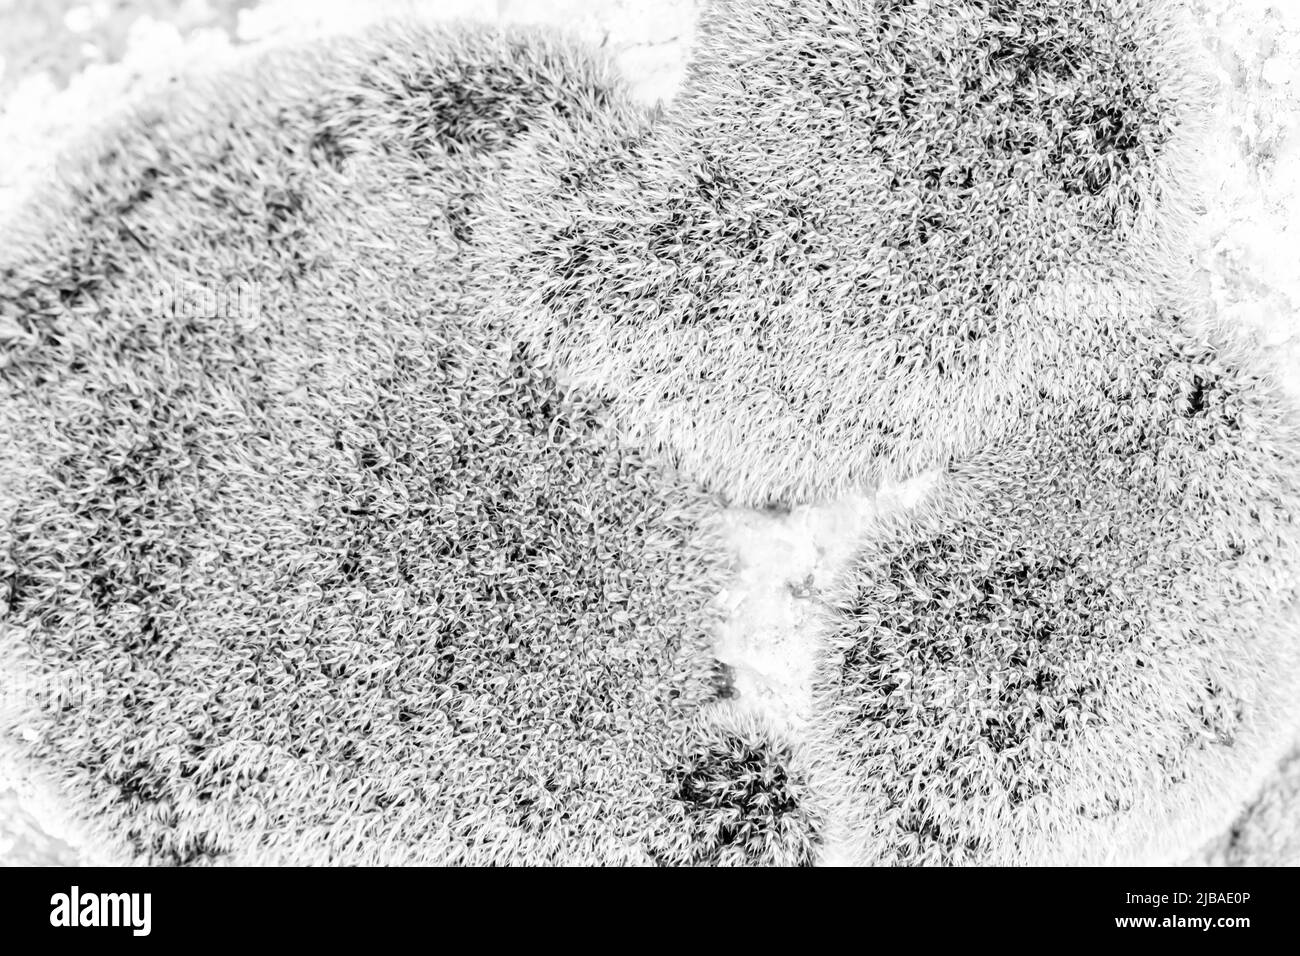 Lichen stain Black and White Stock Photos & Images - Alamy